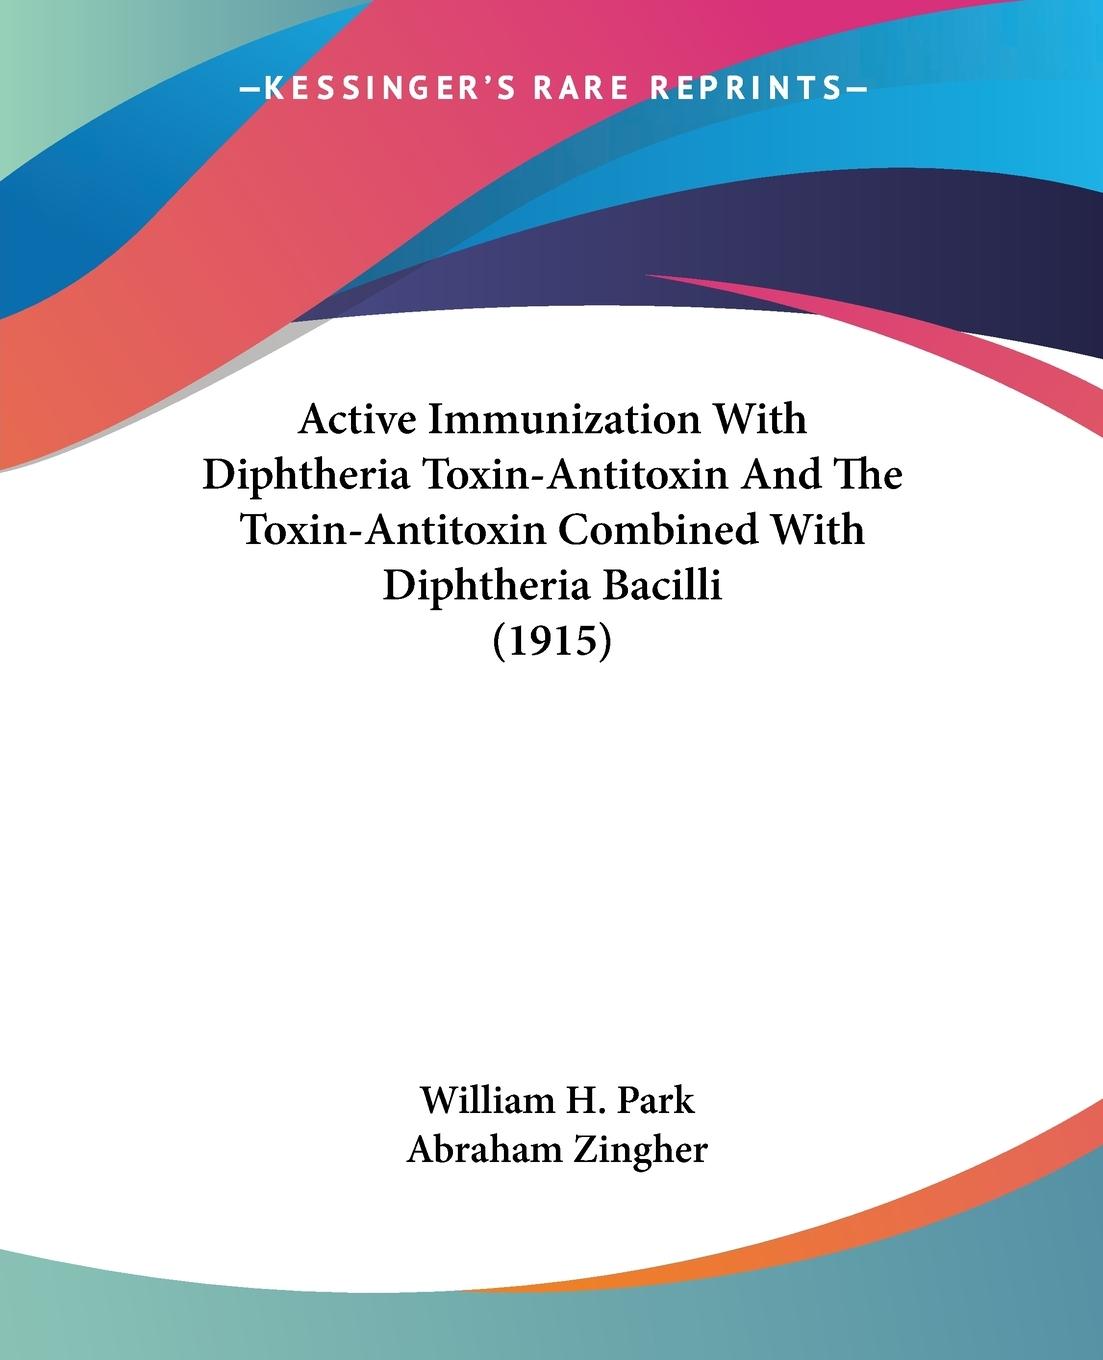 Active Immunization With Diphtheria Toxin-Antitoxin And The Toxin-Antitoxin Combined With Diphtheria Bacilli (1915) - Park, William H. Zingher, Abraham